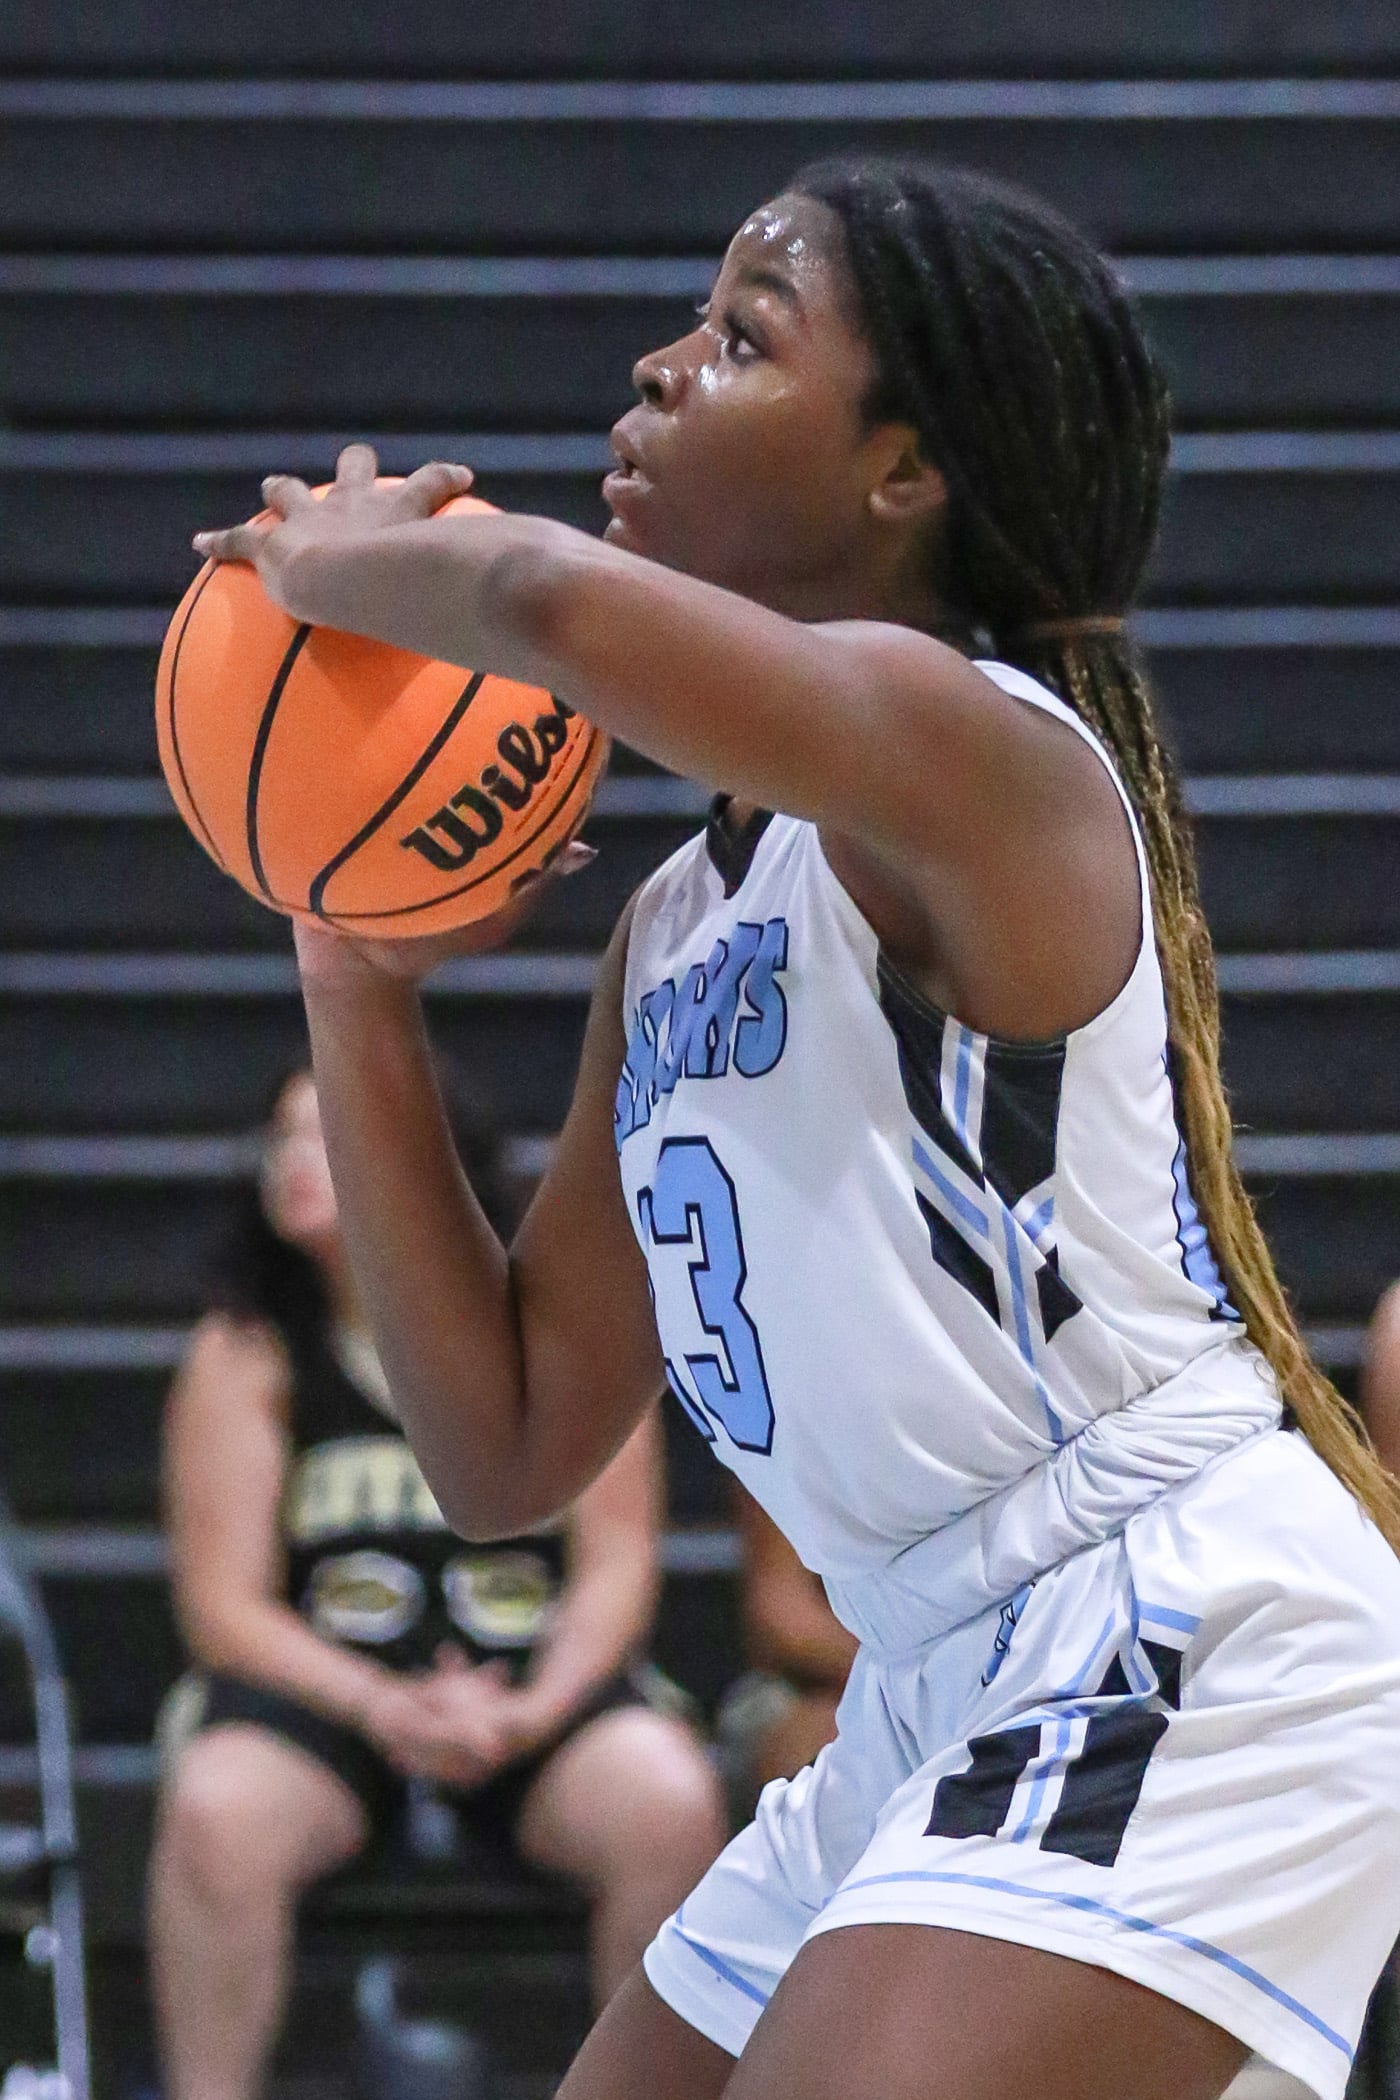 Sharks 23 So. Jaida Grier shoots to put points on the board 11/15/22 against Citrus High School. Photo by Cheryl Clanton.